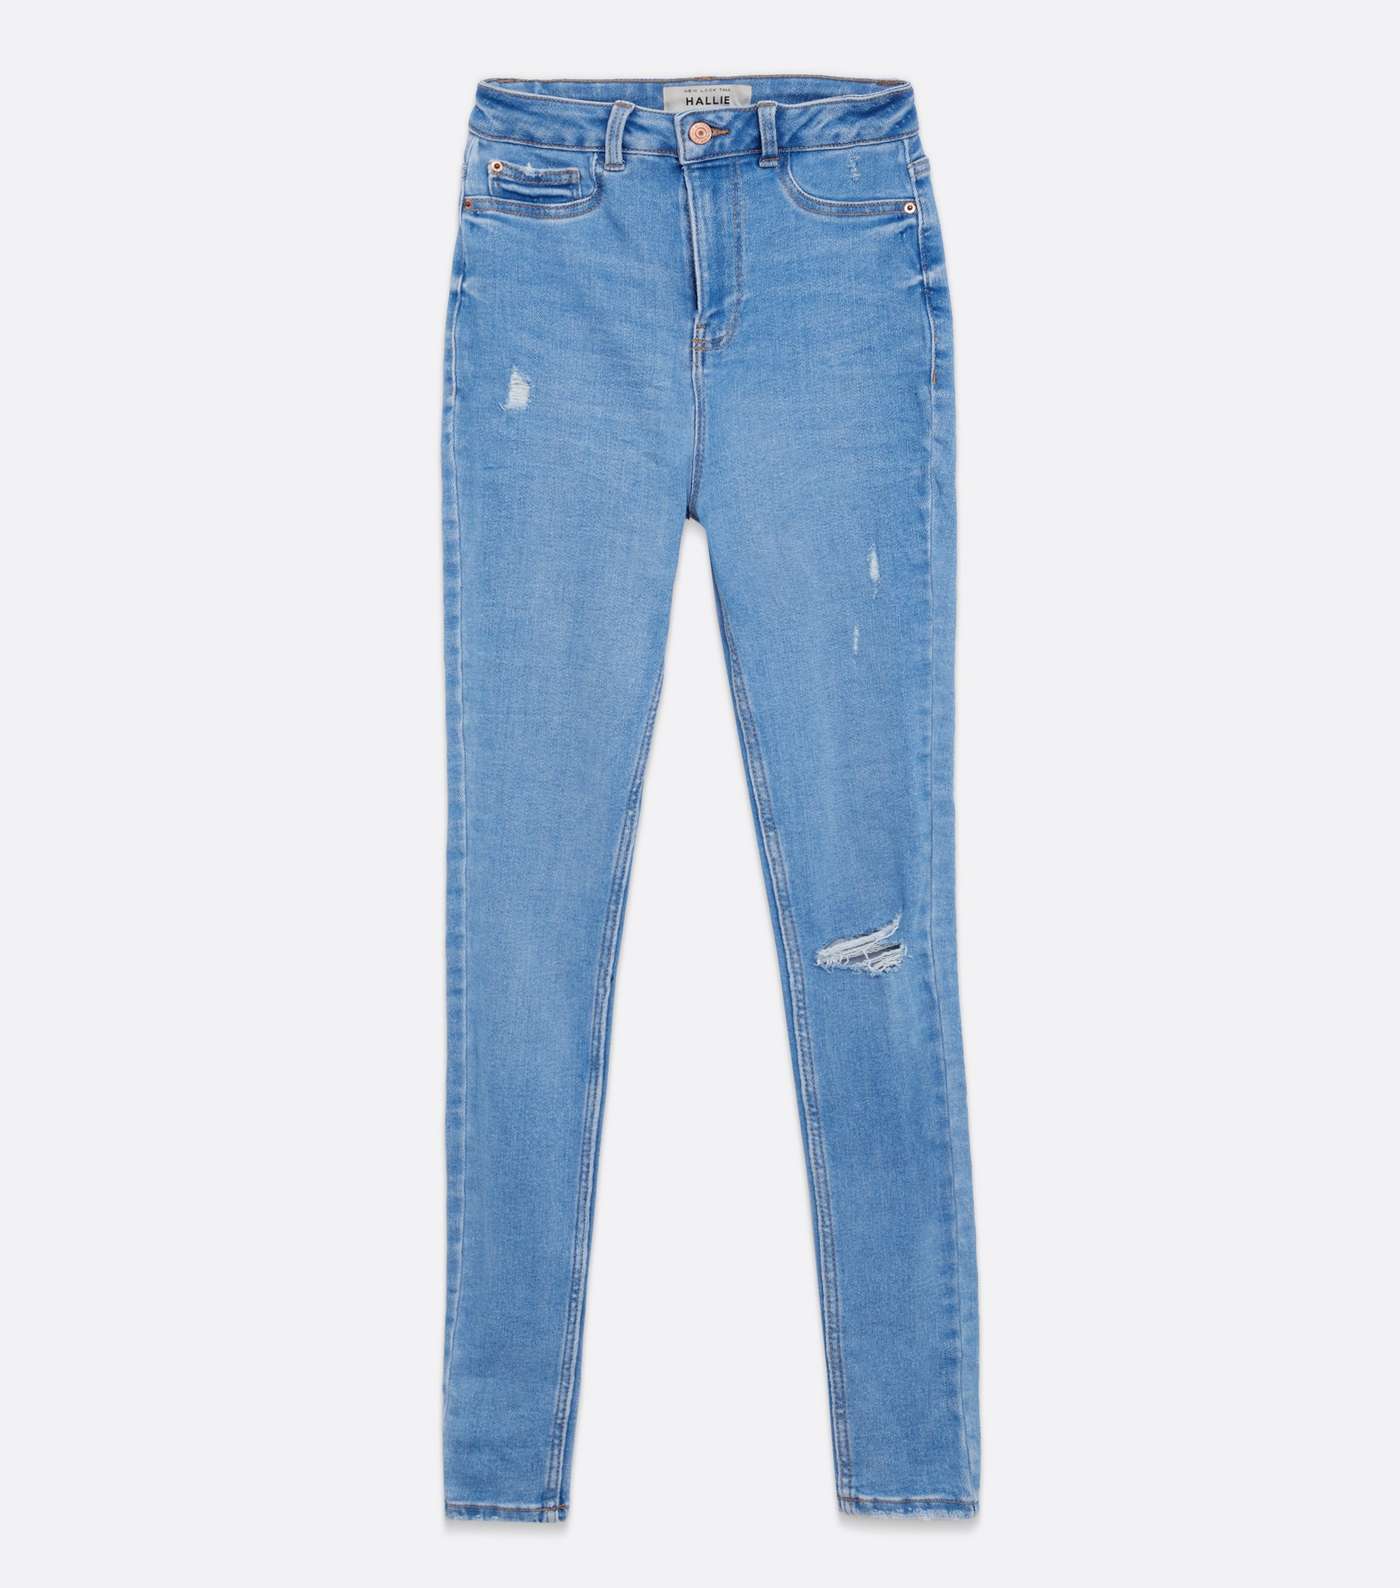 Tall Bright Blue Ripped High Waist Hallie Super Skinny Jeans Image 5